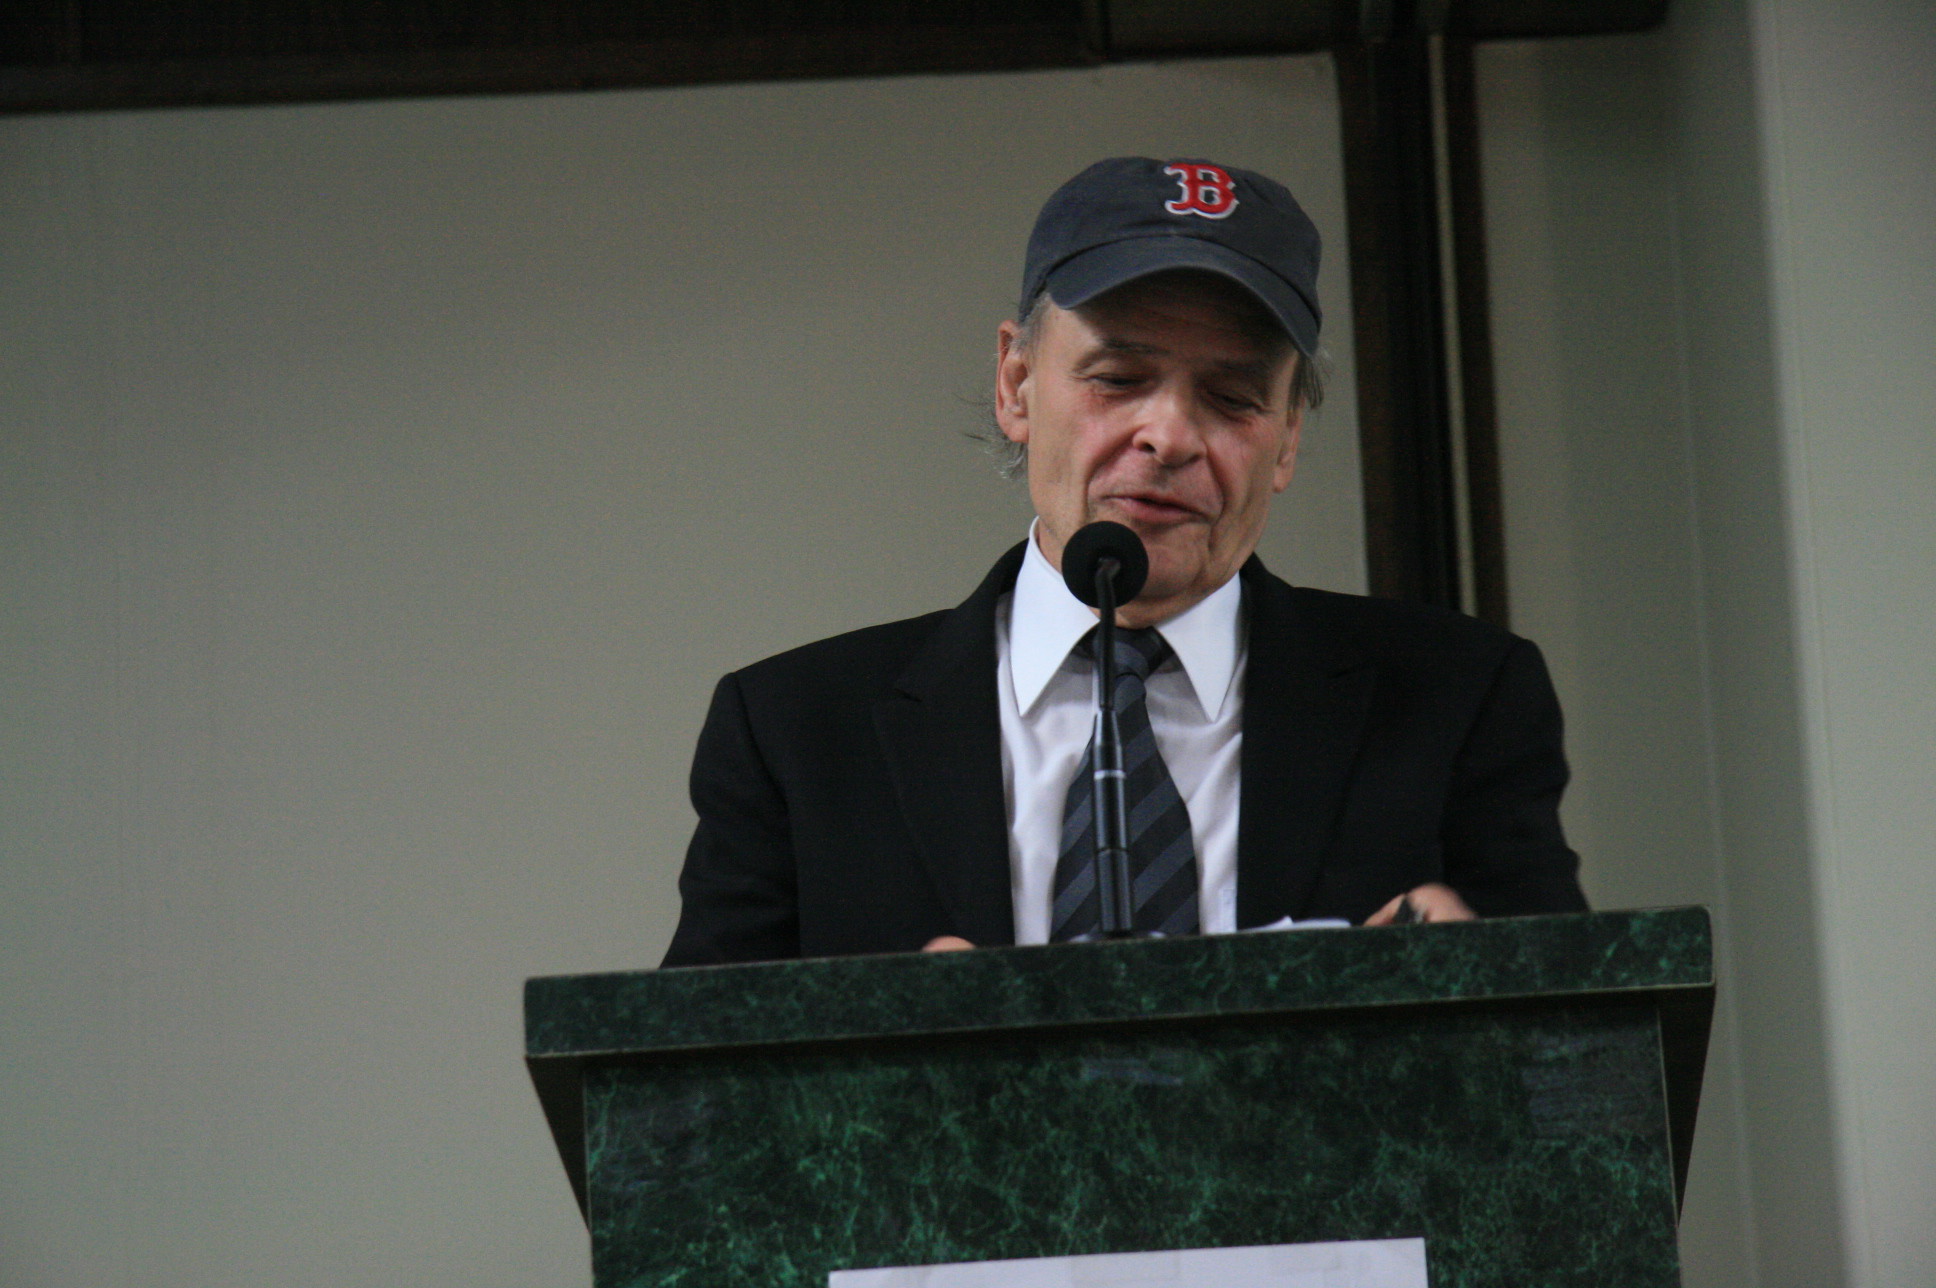 Author Tim O'Brien at a speaking event